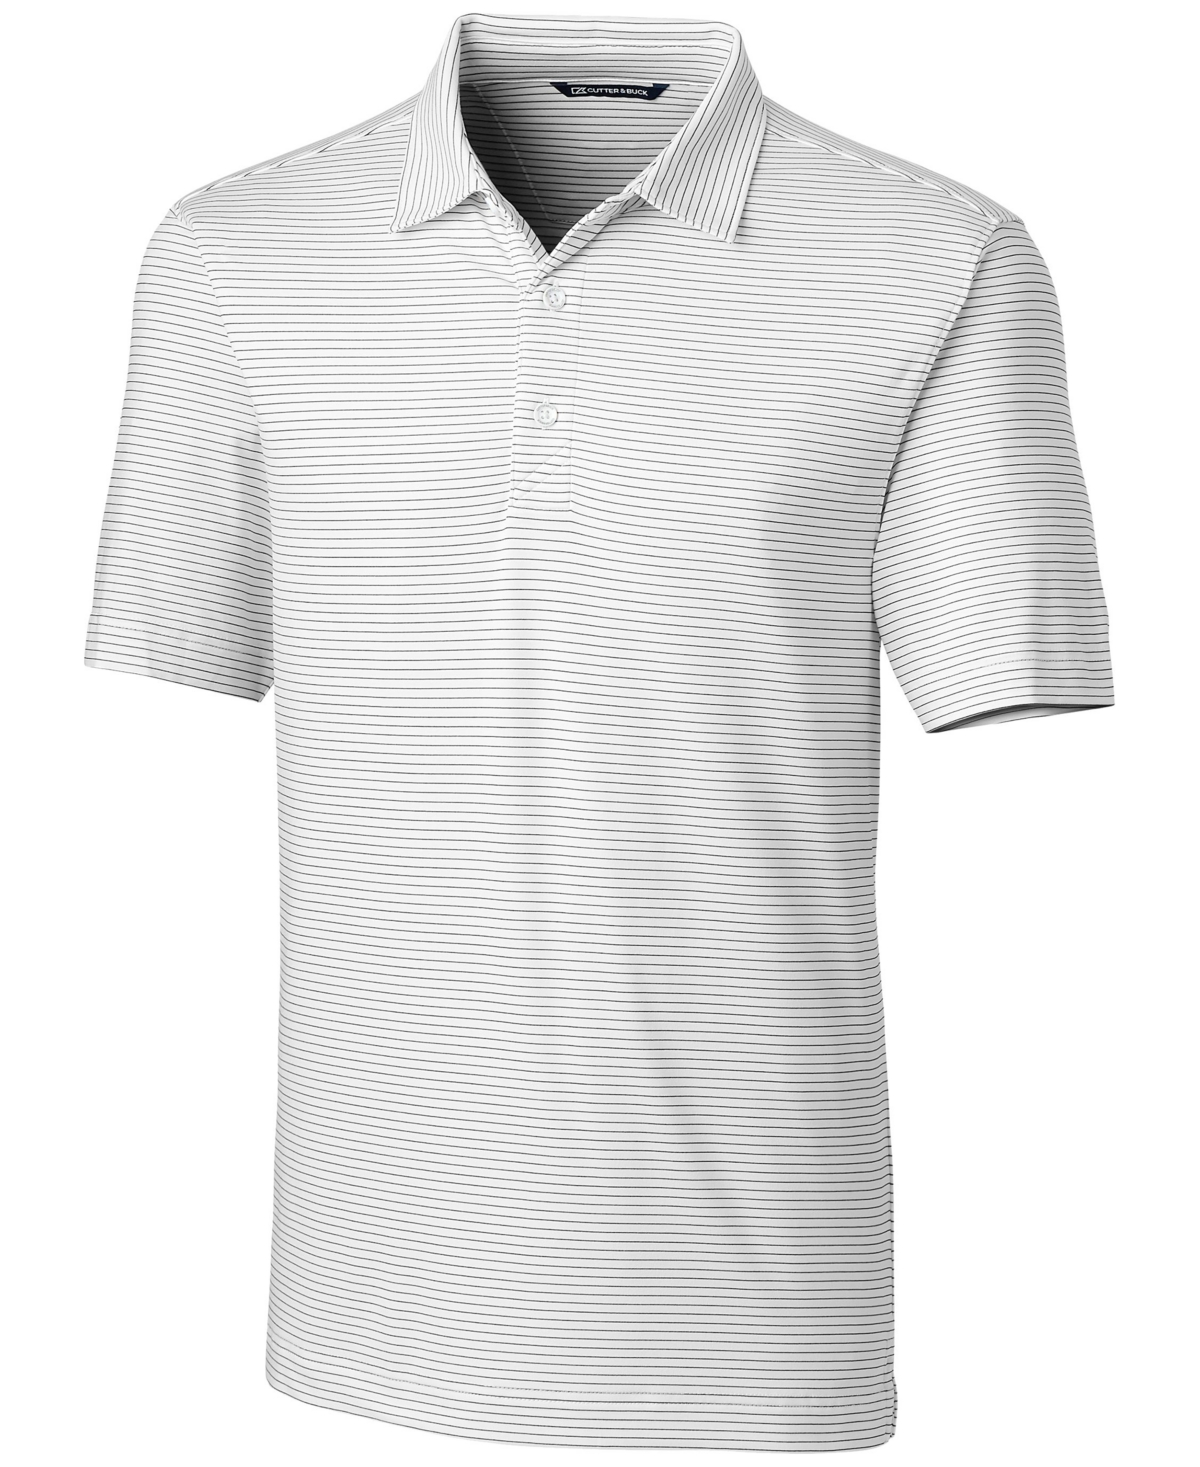 Forge Pencil Stripe Stretch Men's Big and Tall Polo Shirt - Hunter